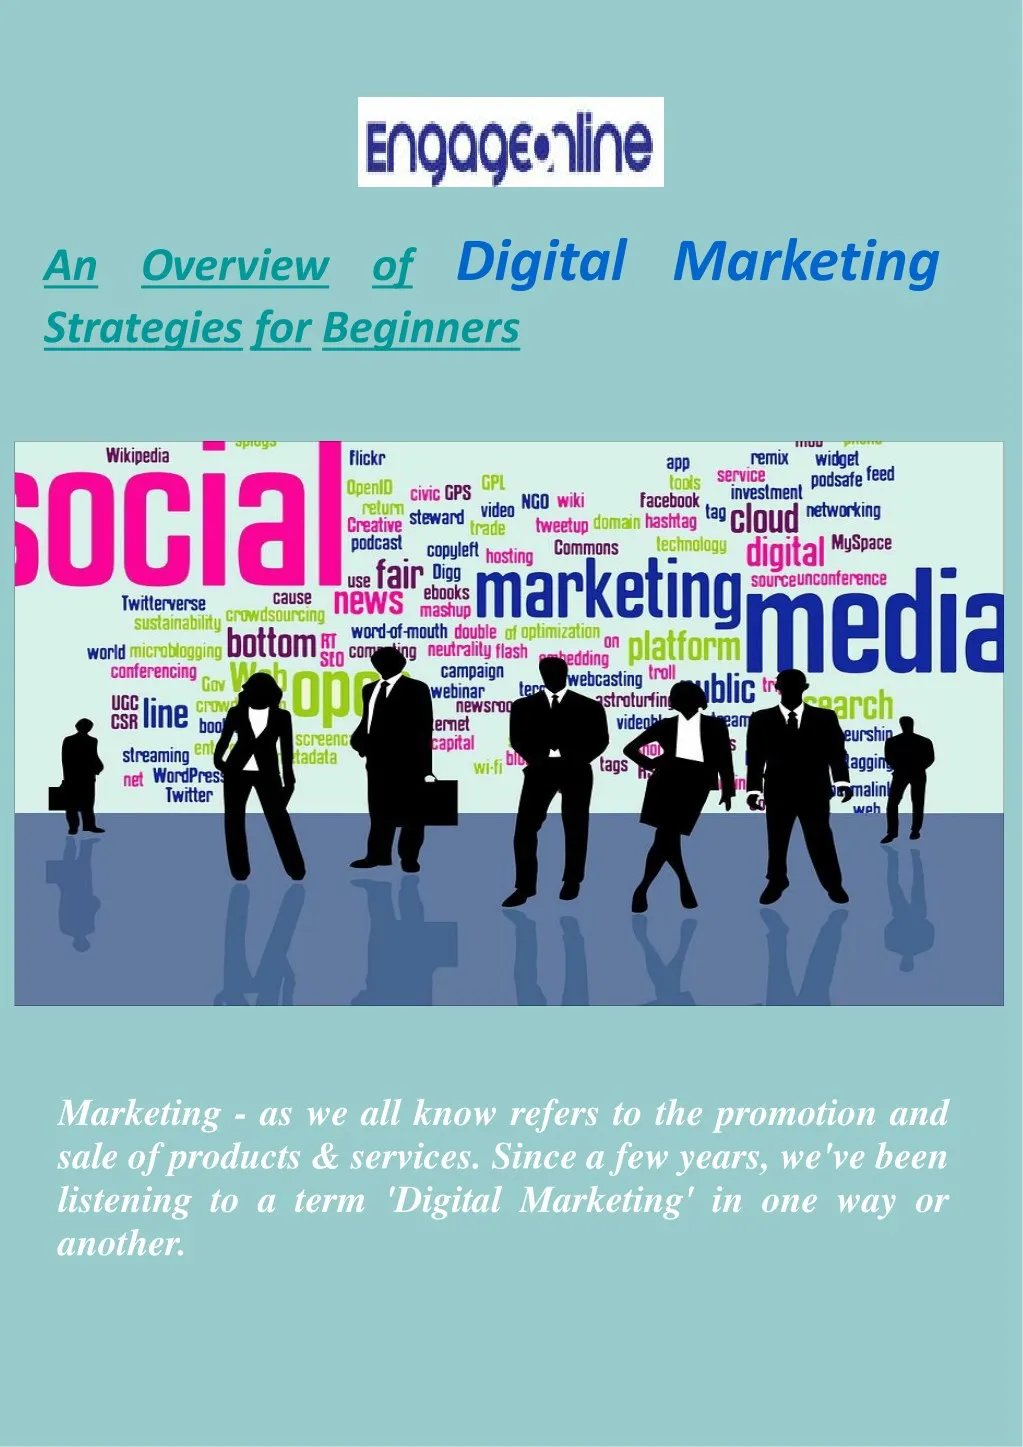 an overview of digital marketing strategies